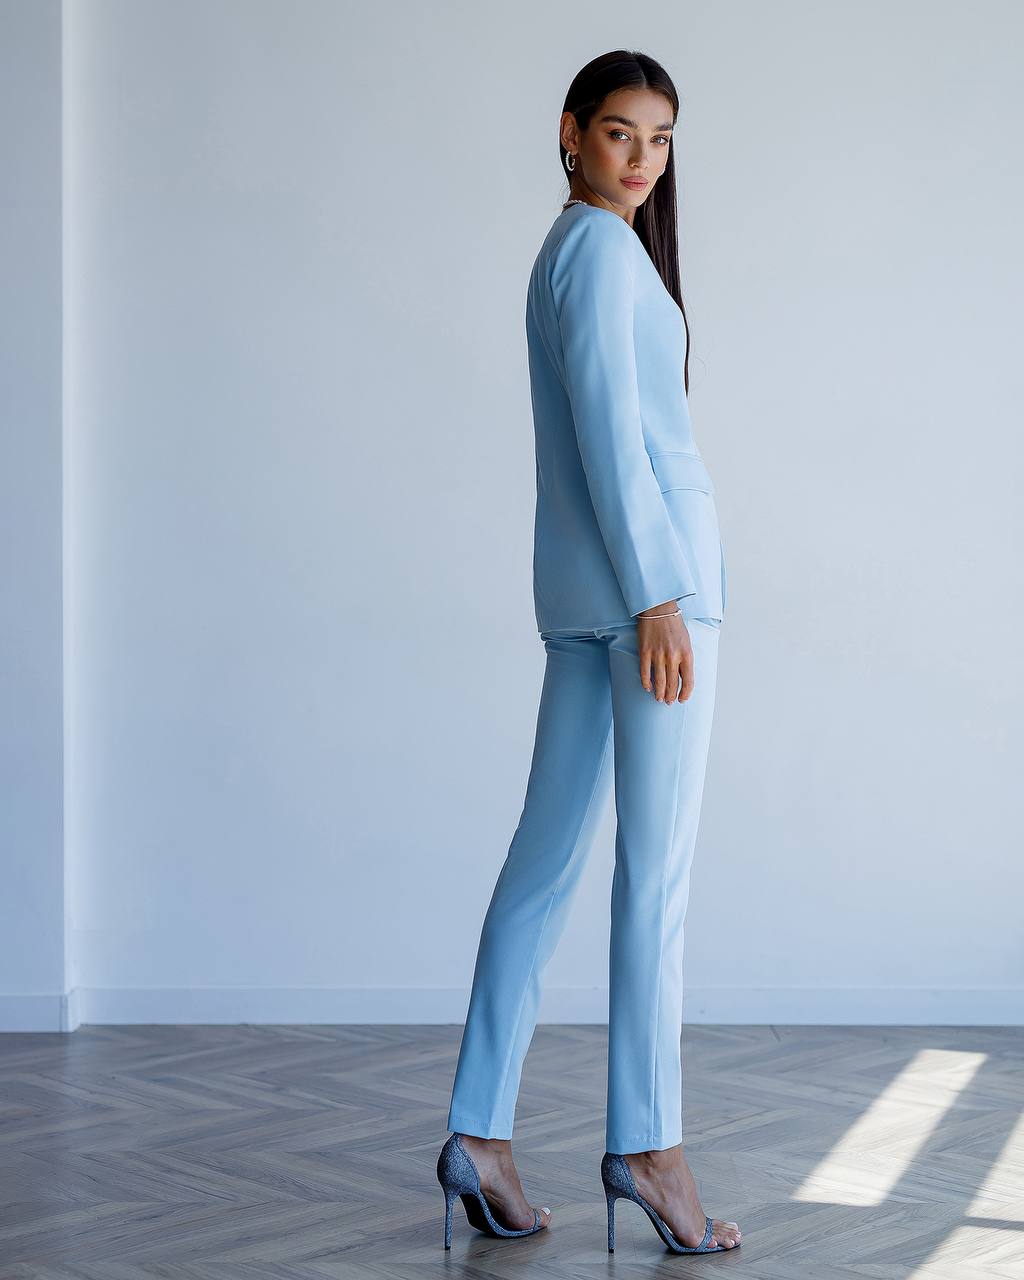 a woman in a blue suit and high heels